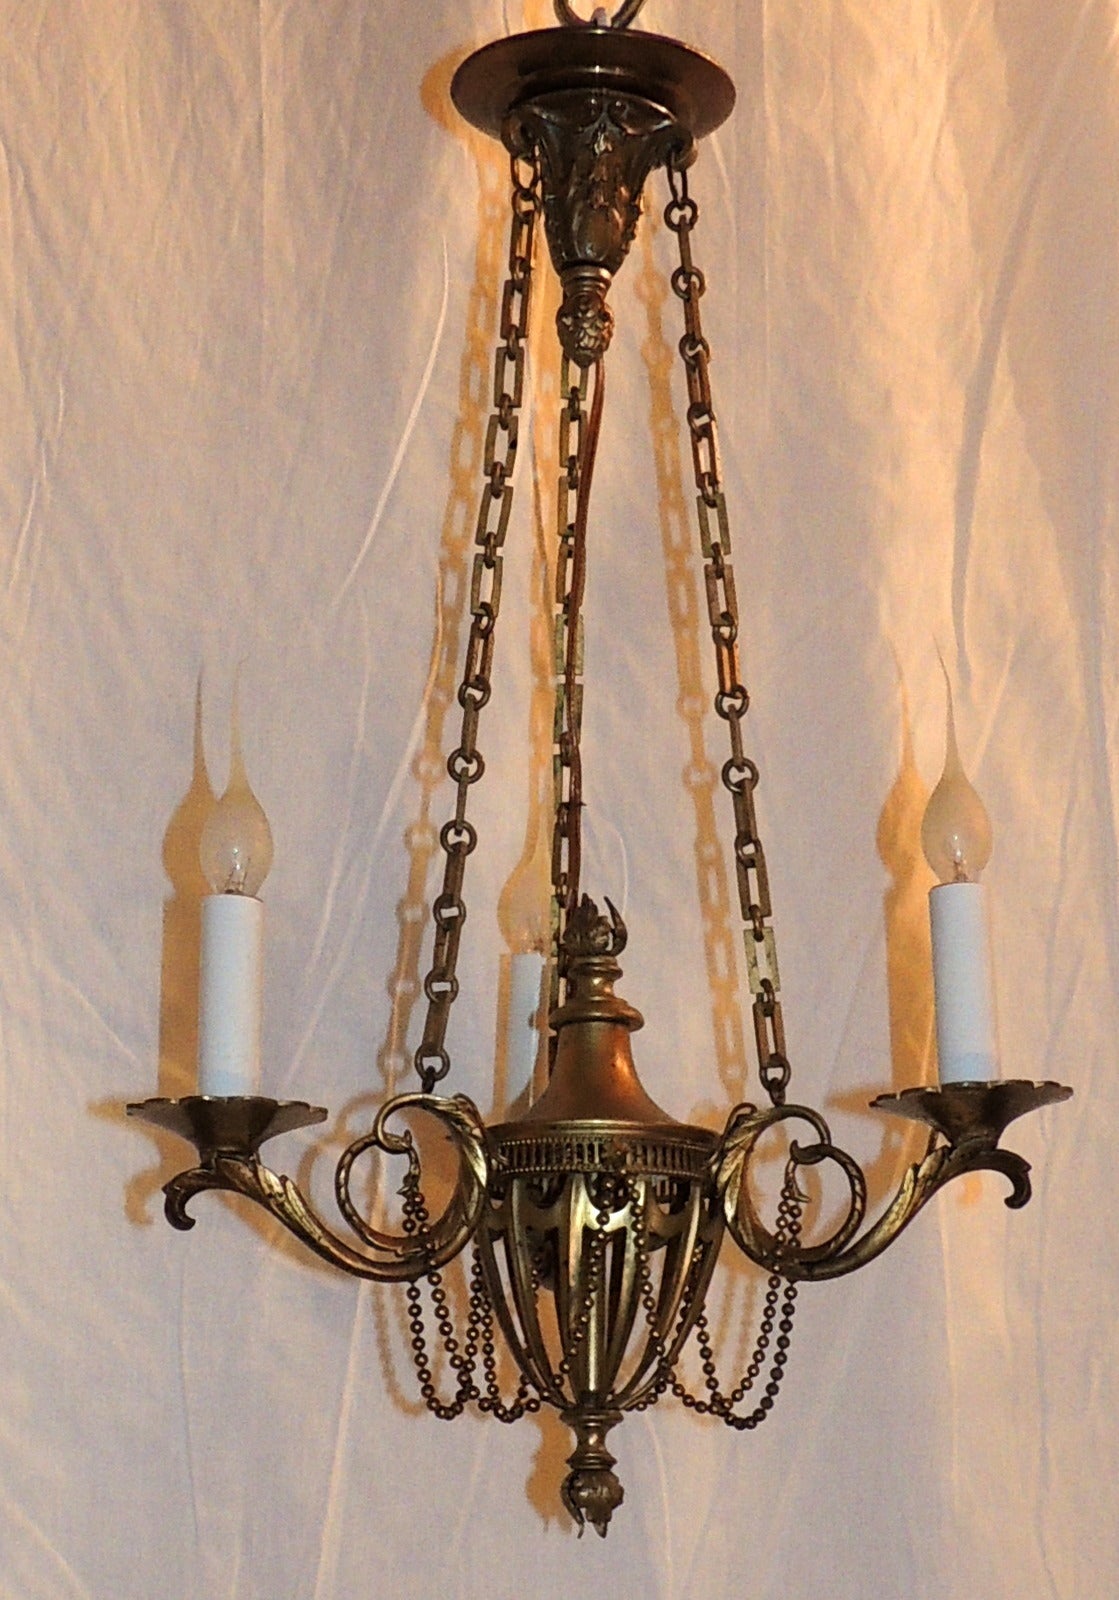 Understated elegance is the best description of this three-arm chandelier.
Beautiful box chain supports the three-scroll and filigree engraved arms supporting the lights. The top and bottom centre are decorated with flame top and bottom detail and